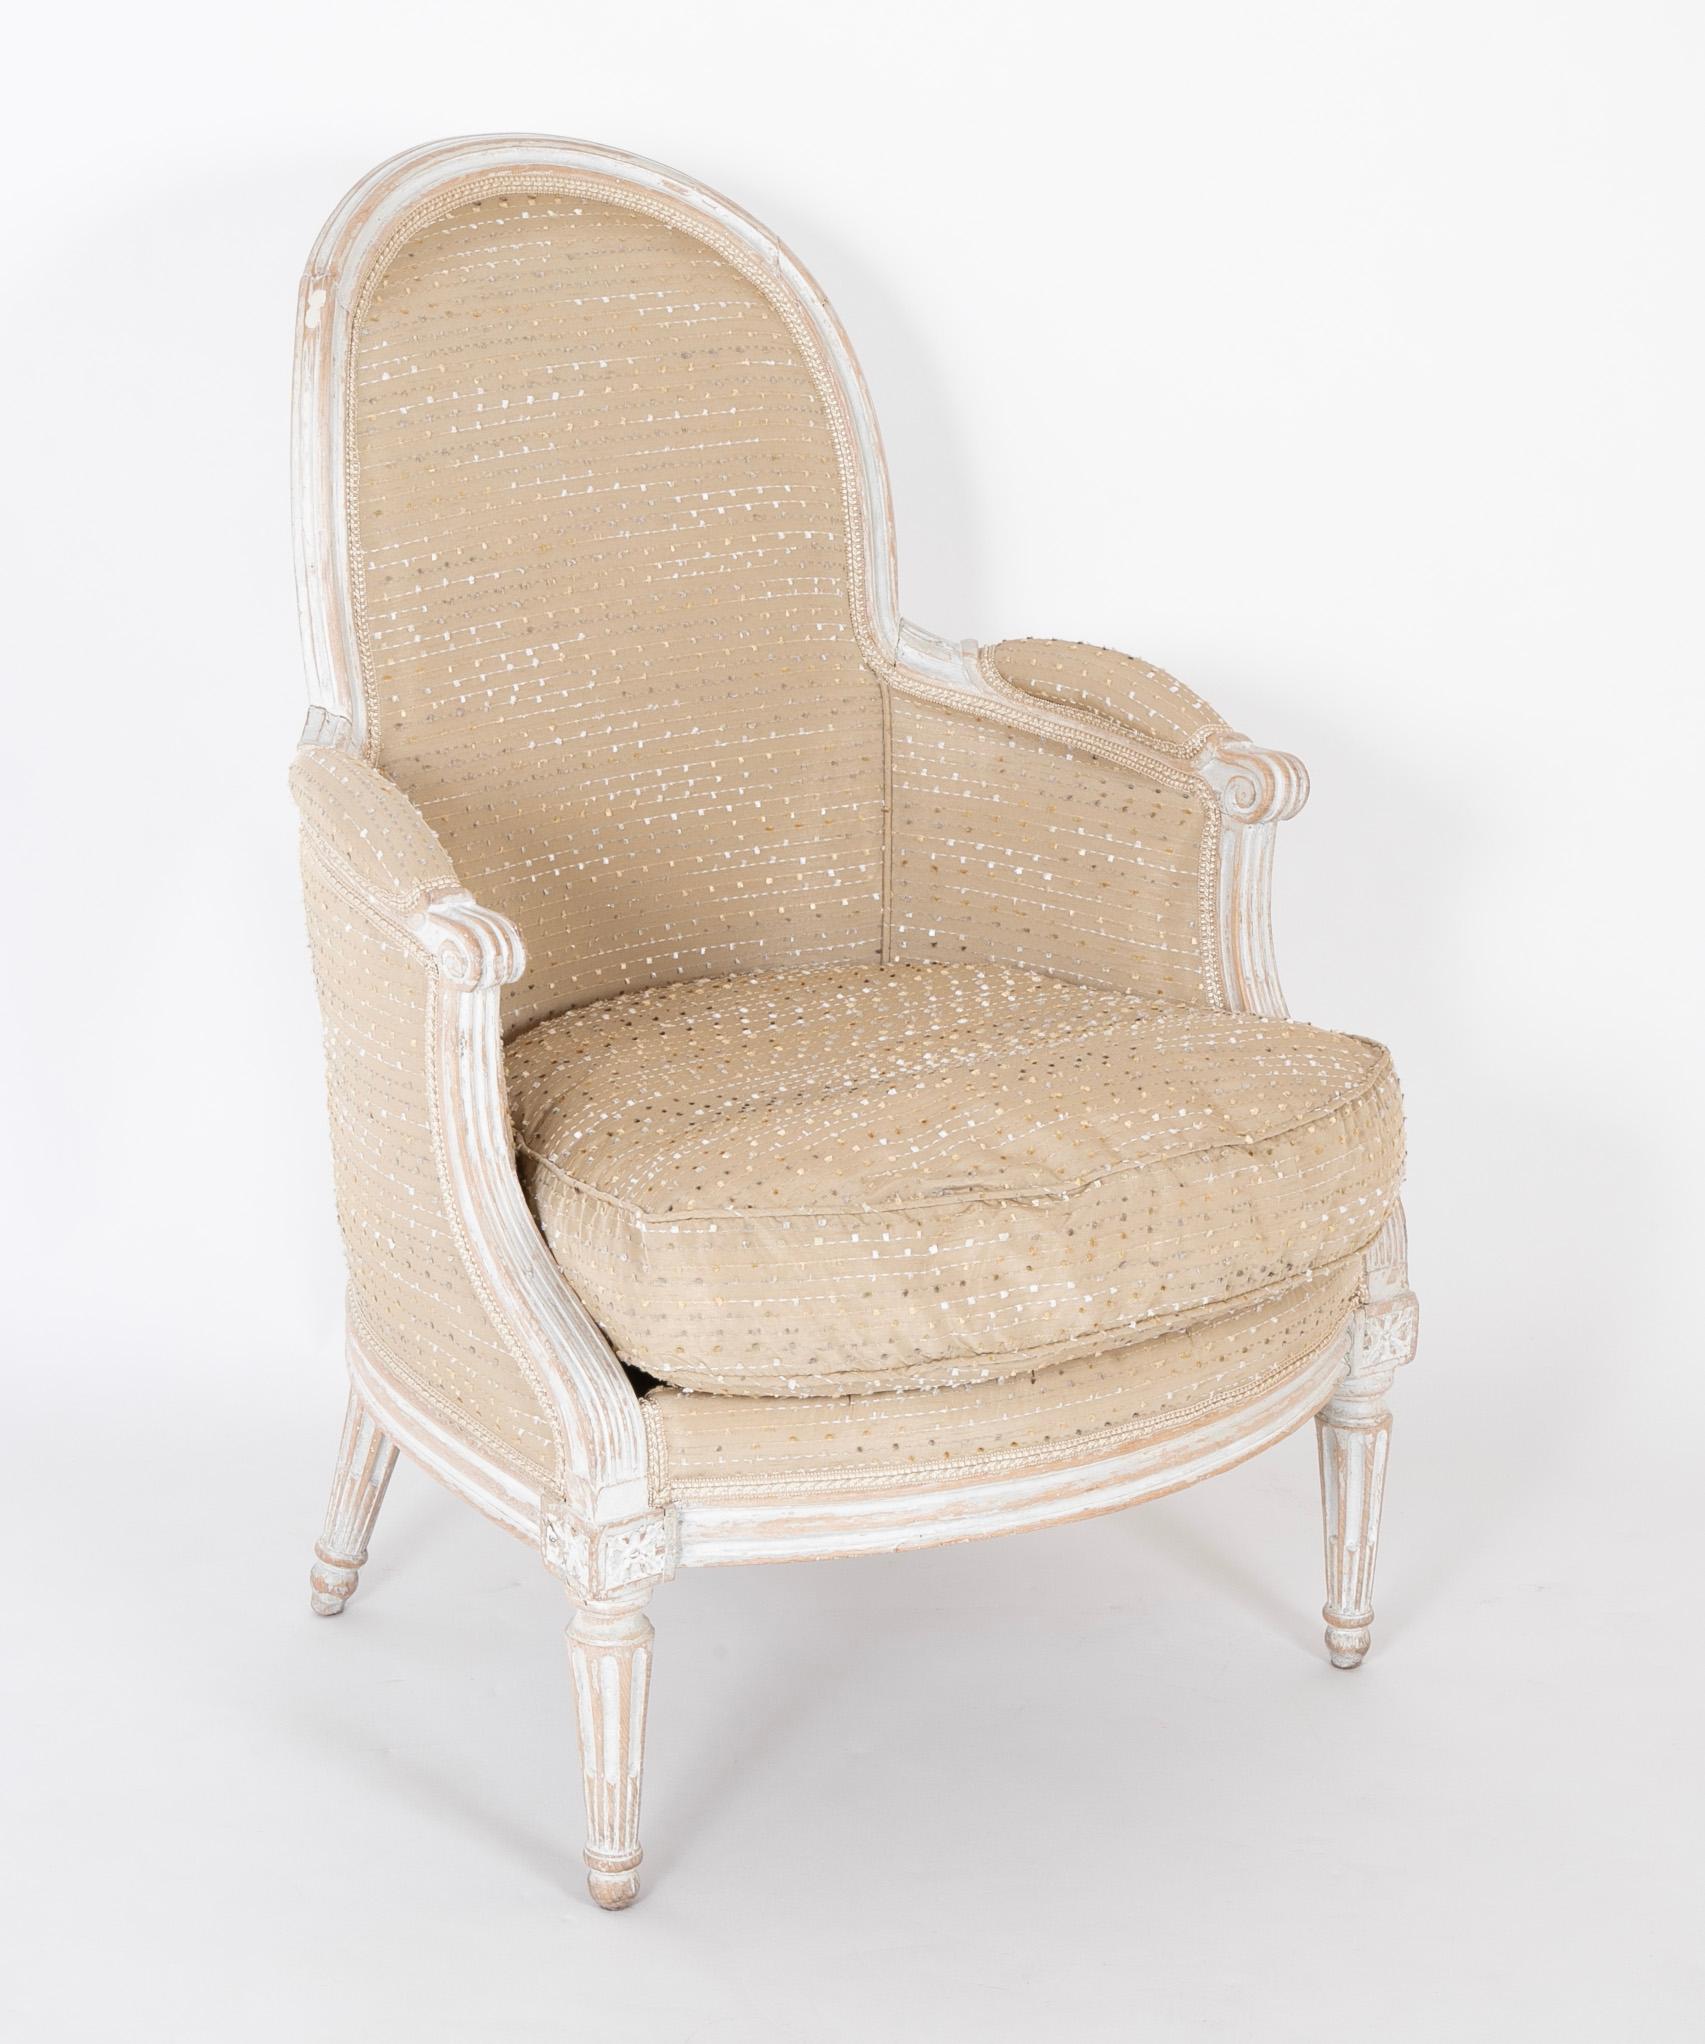 The frame of this chair has a wonderful scraped and waxed finish.  This is a period Louis XVI chair.    The oval back seat has a loose feather wrapped foam cushion newly reupholstered upholstered in a contemporary fabric, The chair rises hand carved